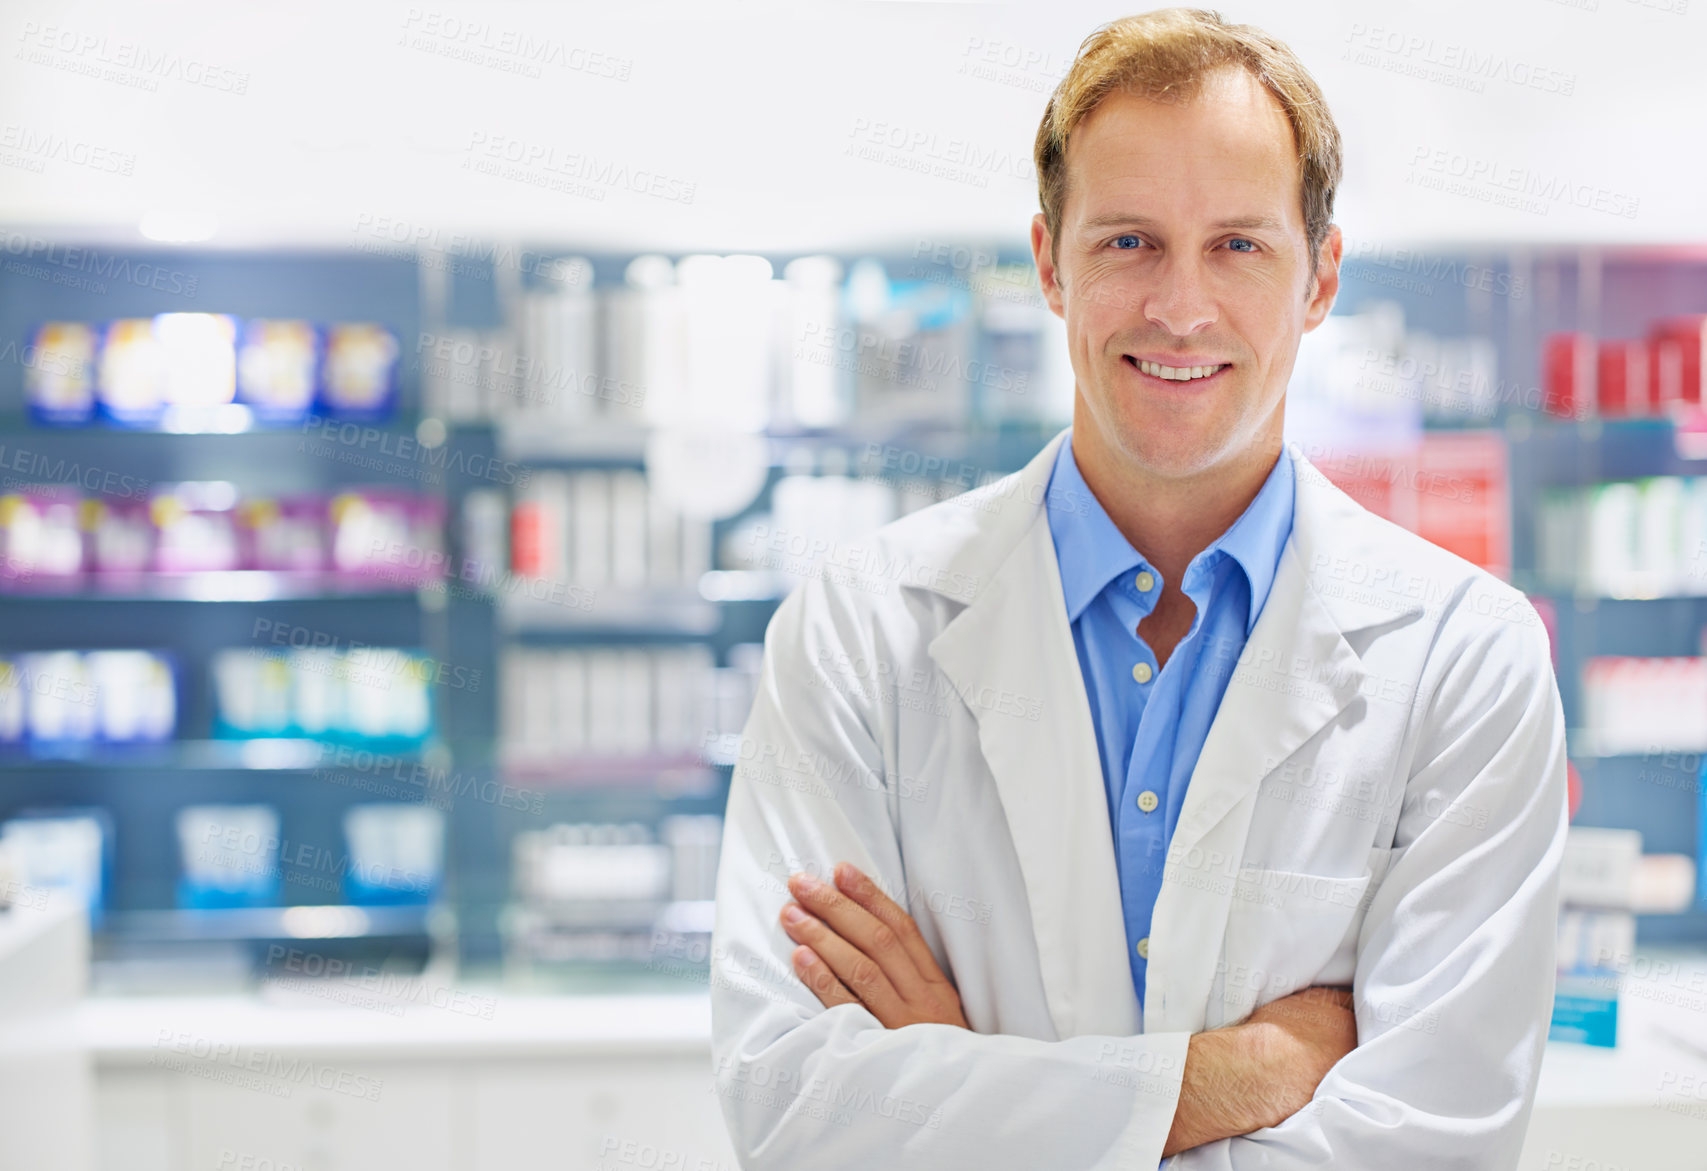 Buy stock photo Portrait of a smiling clinician standing in a cosmetics store